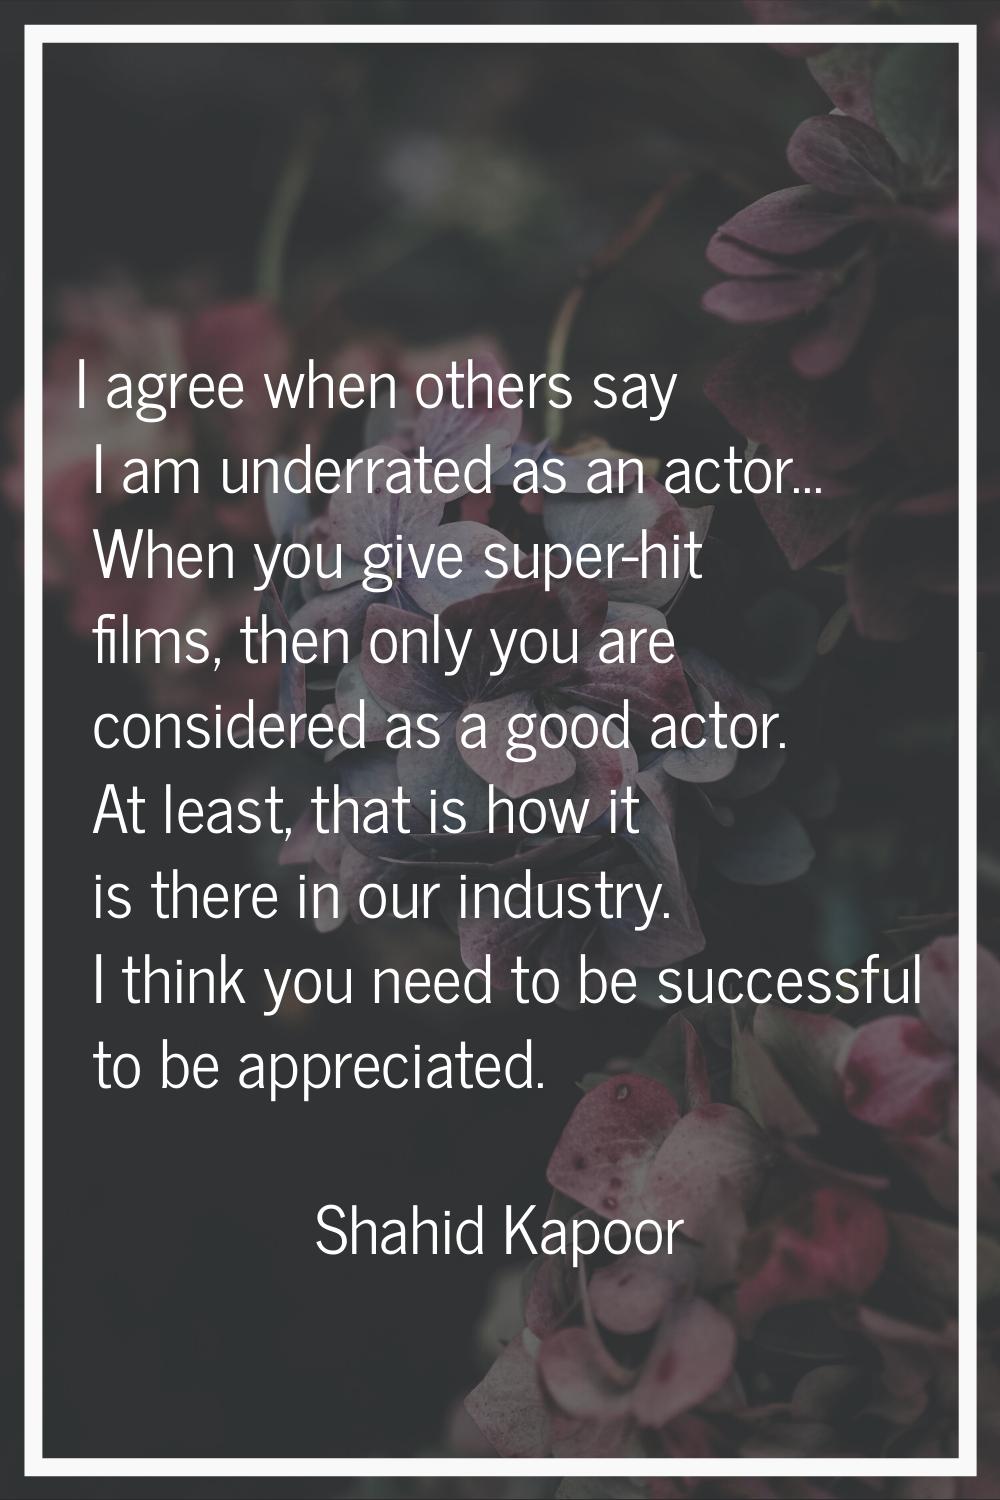 I agree when others say I am underrated as an actor... When you give super-hit films, then only you